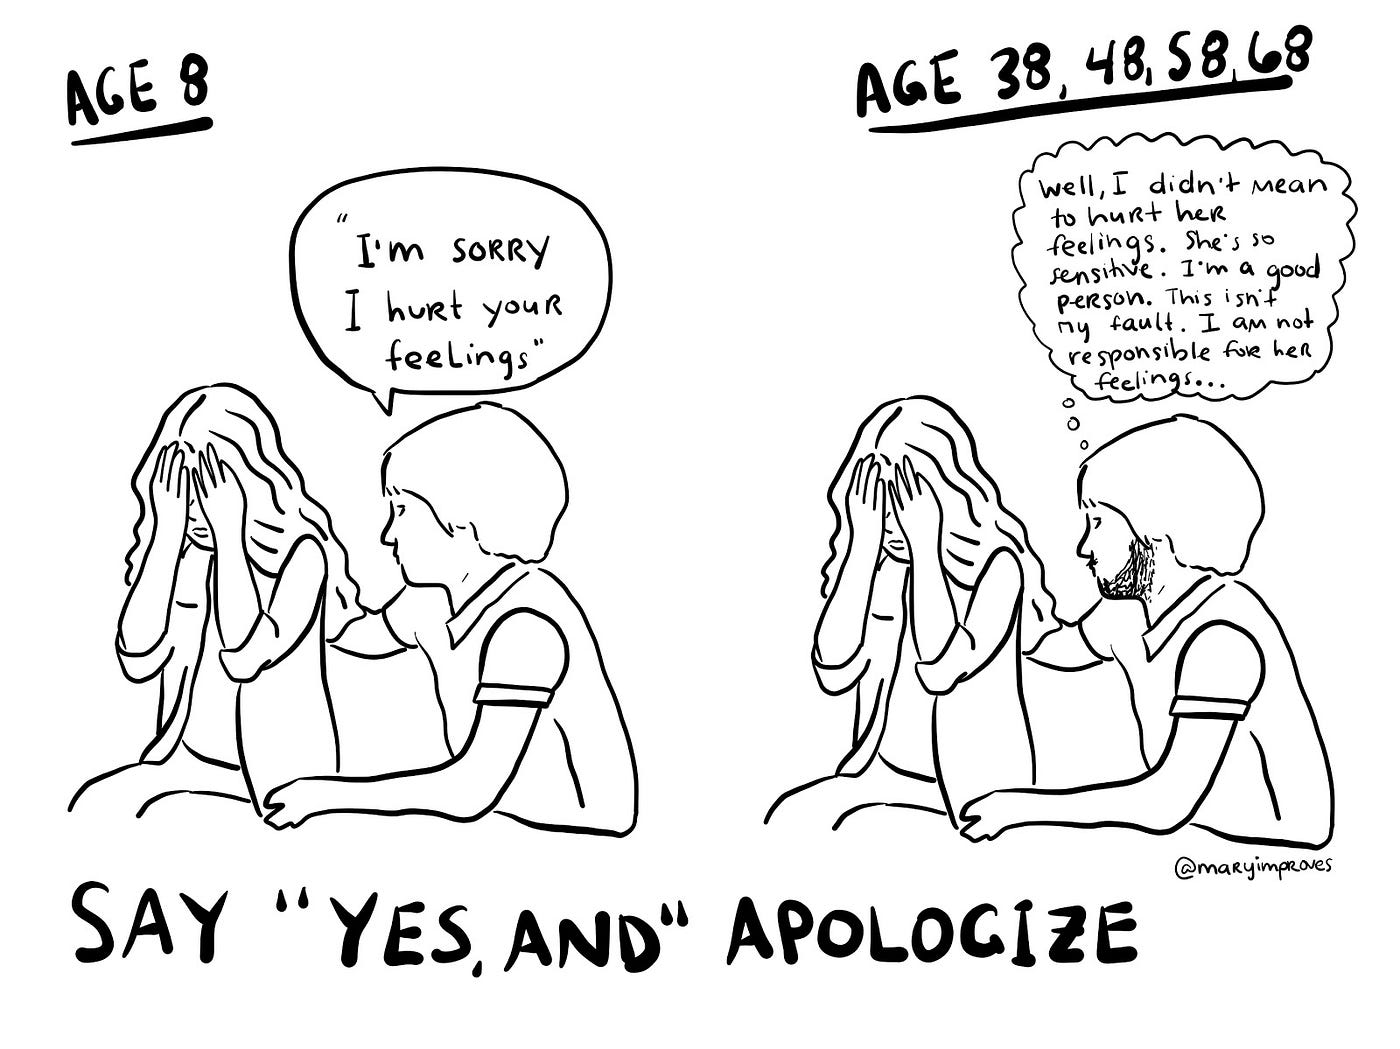 Why does it hurt to apologize?